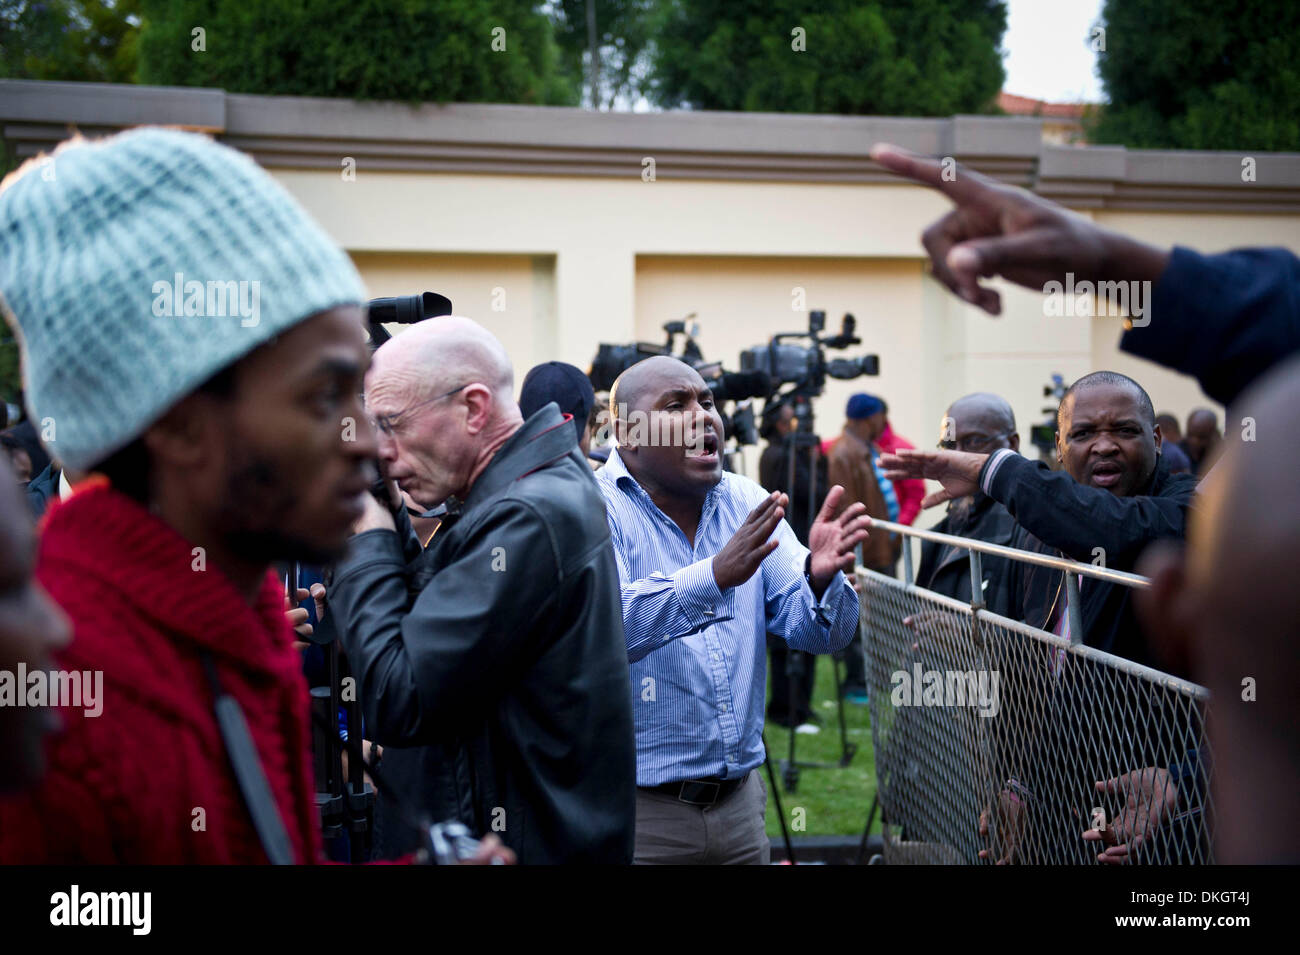 Johannesburg, South Africa. 6th December 2013. Police put up fence barricading outside former President Nelson Mandela’s Home on December 6, 2013 in Houghton, Johannesburg, South Africa. Mourners have been gathering since early hours of the morning to pay their respects. The Father of the Nation, Nelson Mandela, Tata Madiba, passed away quietly on the evening of December 5, 2013 at his home in Houghton with family. (Photo by Gallo Images / Foto24 / Nelius Rademan/Alamy Live News) Stock Photo